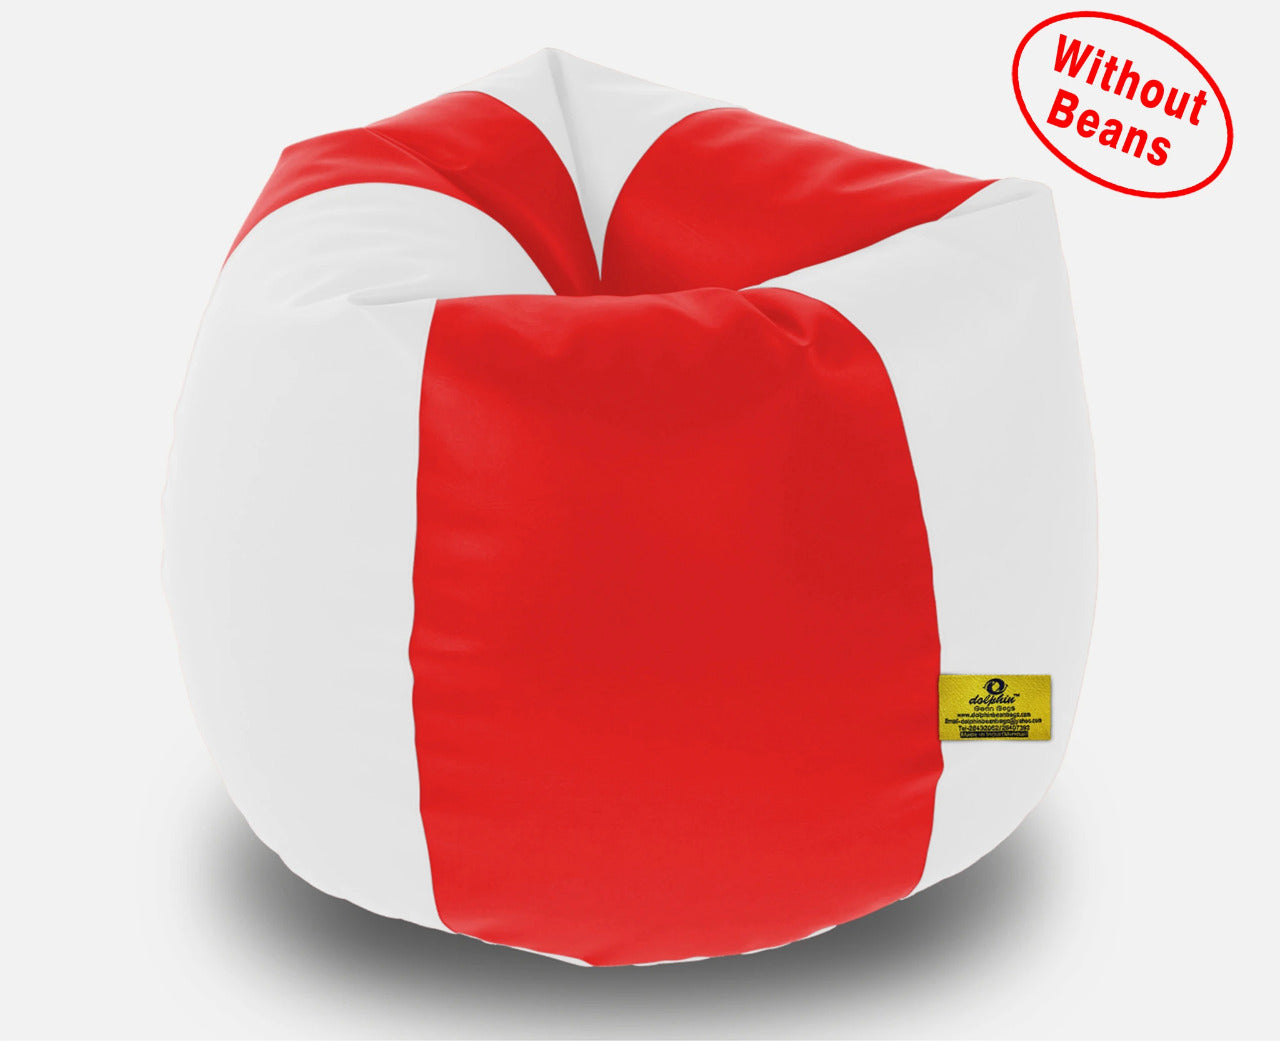 Bean Bag: 3XL RED&WHITE BEAN BAG-COVER (Without Beans)